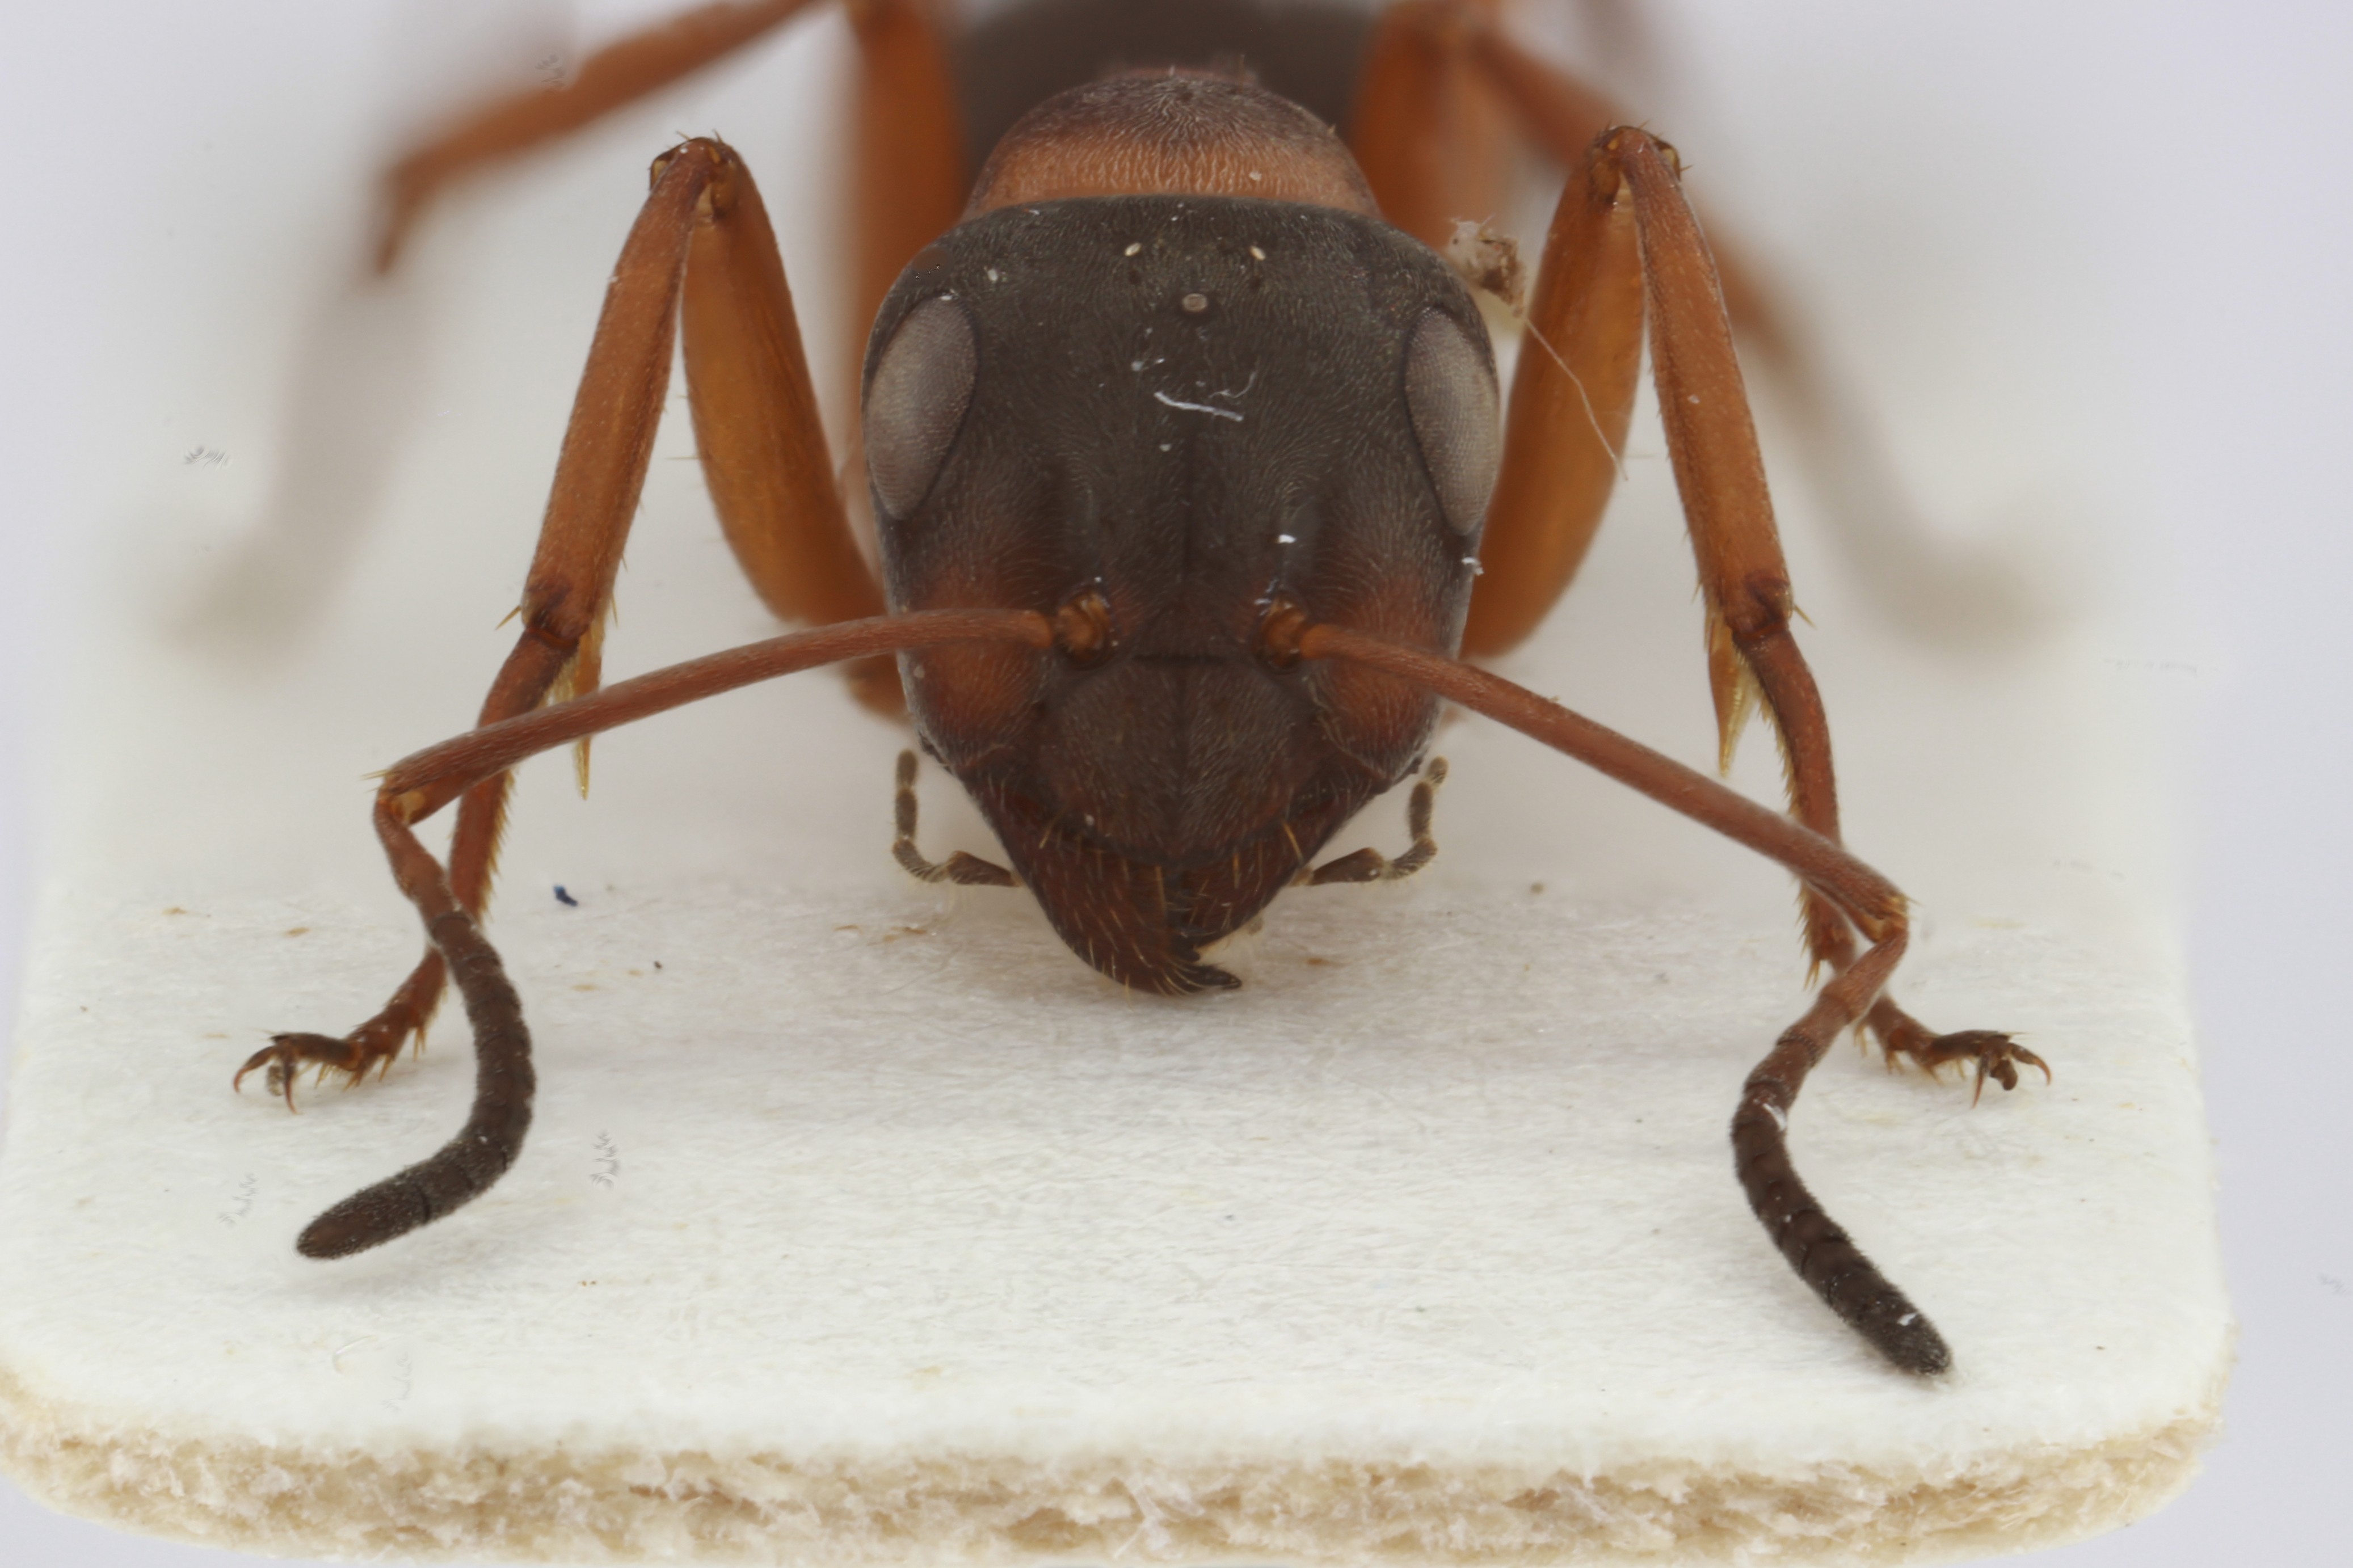 Large Ant 1 Frontal View